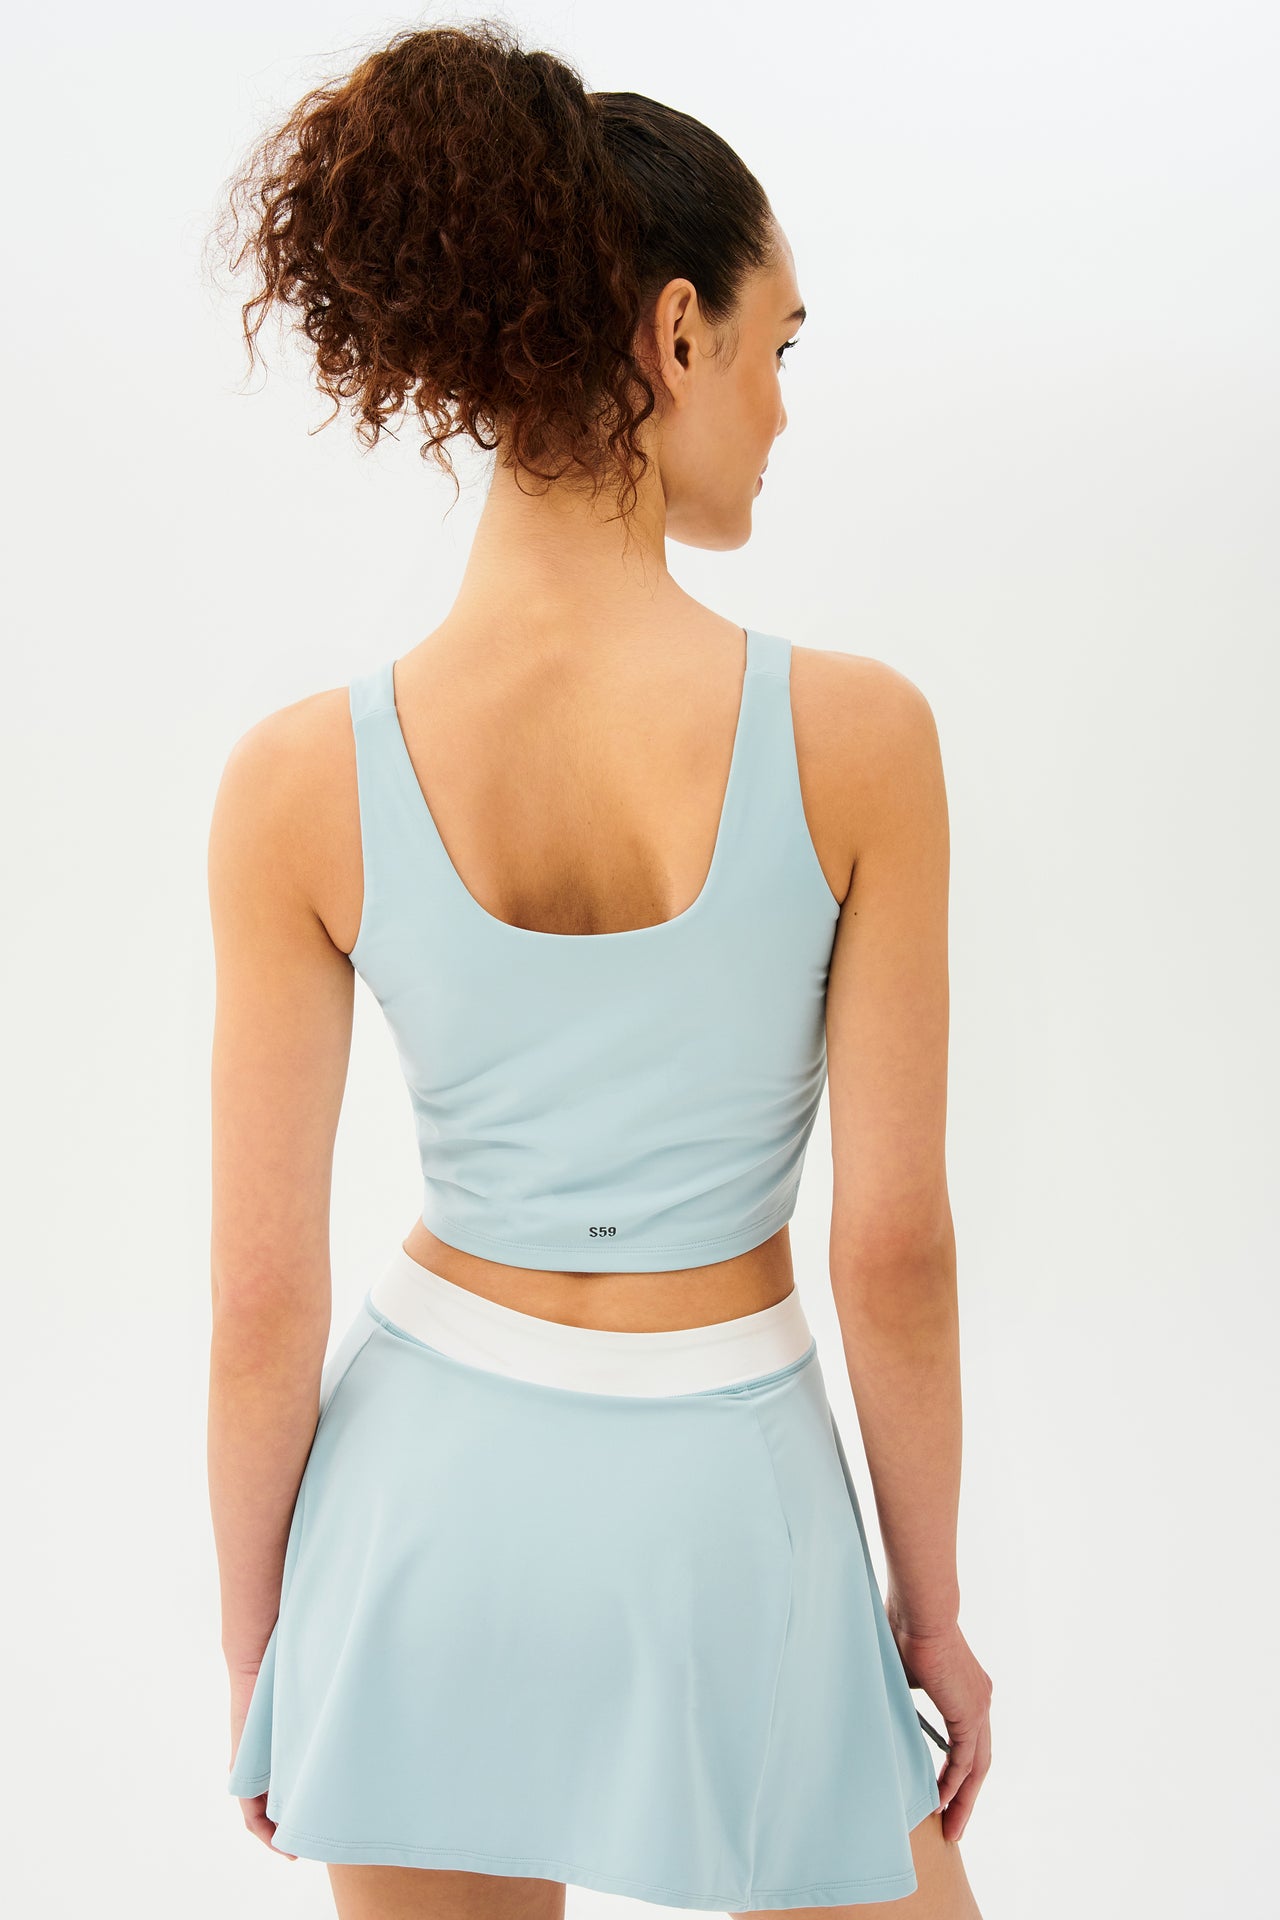 Back view of woman with dark curly hair in a ponytail wearing a cropped teal tank bra with teal skort with white strip on the waistband